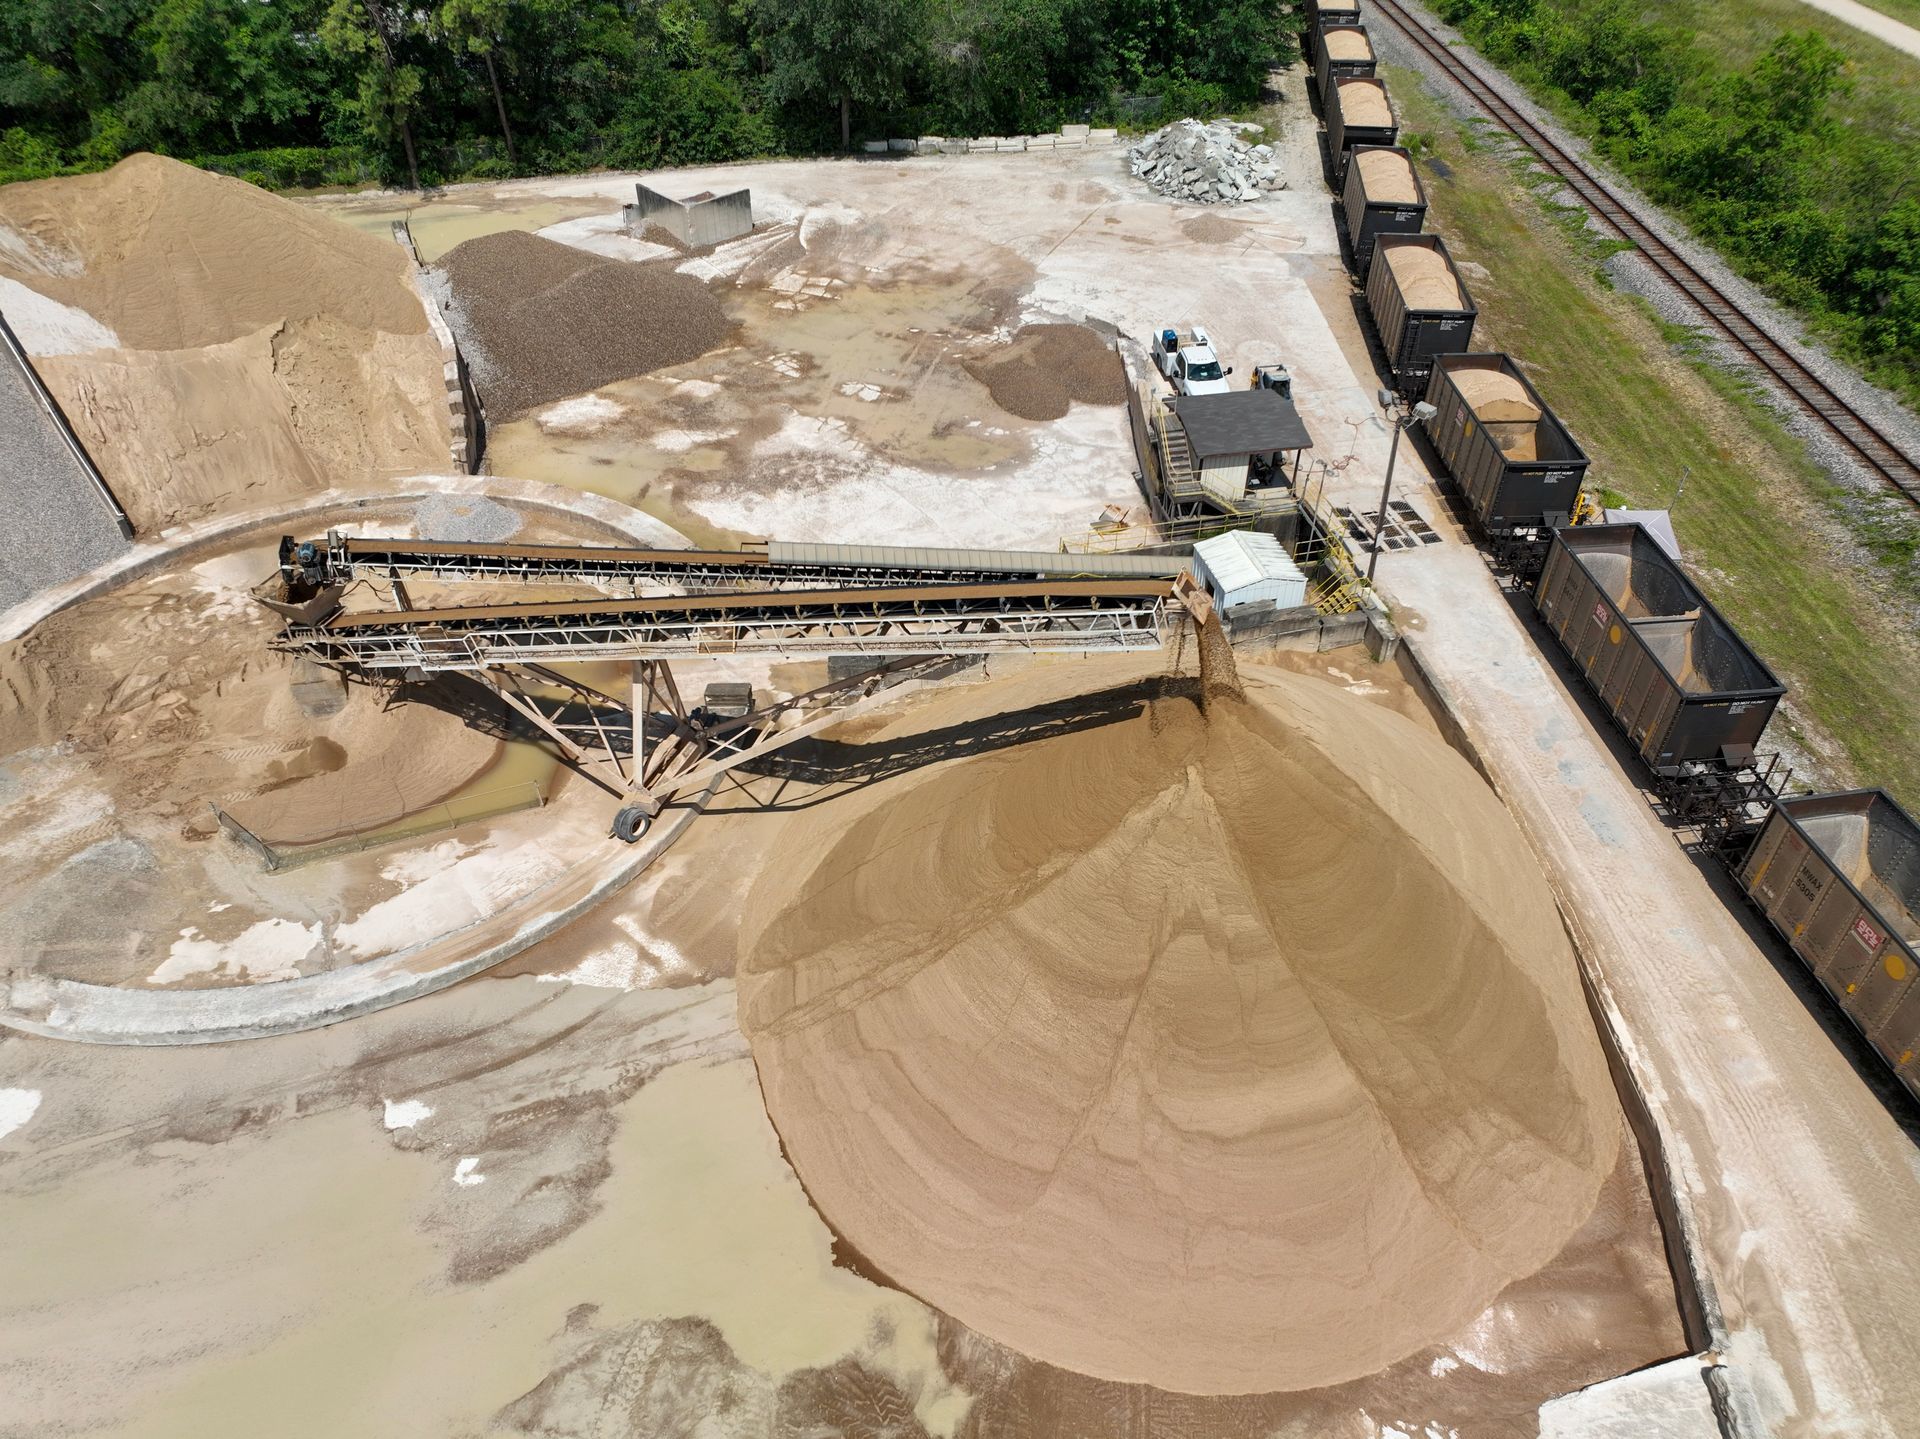 Arial view of ready-mix concrete dispatch location